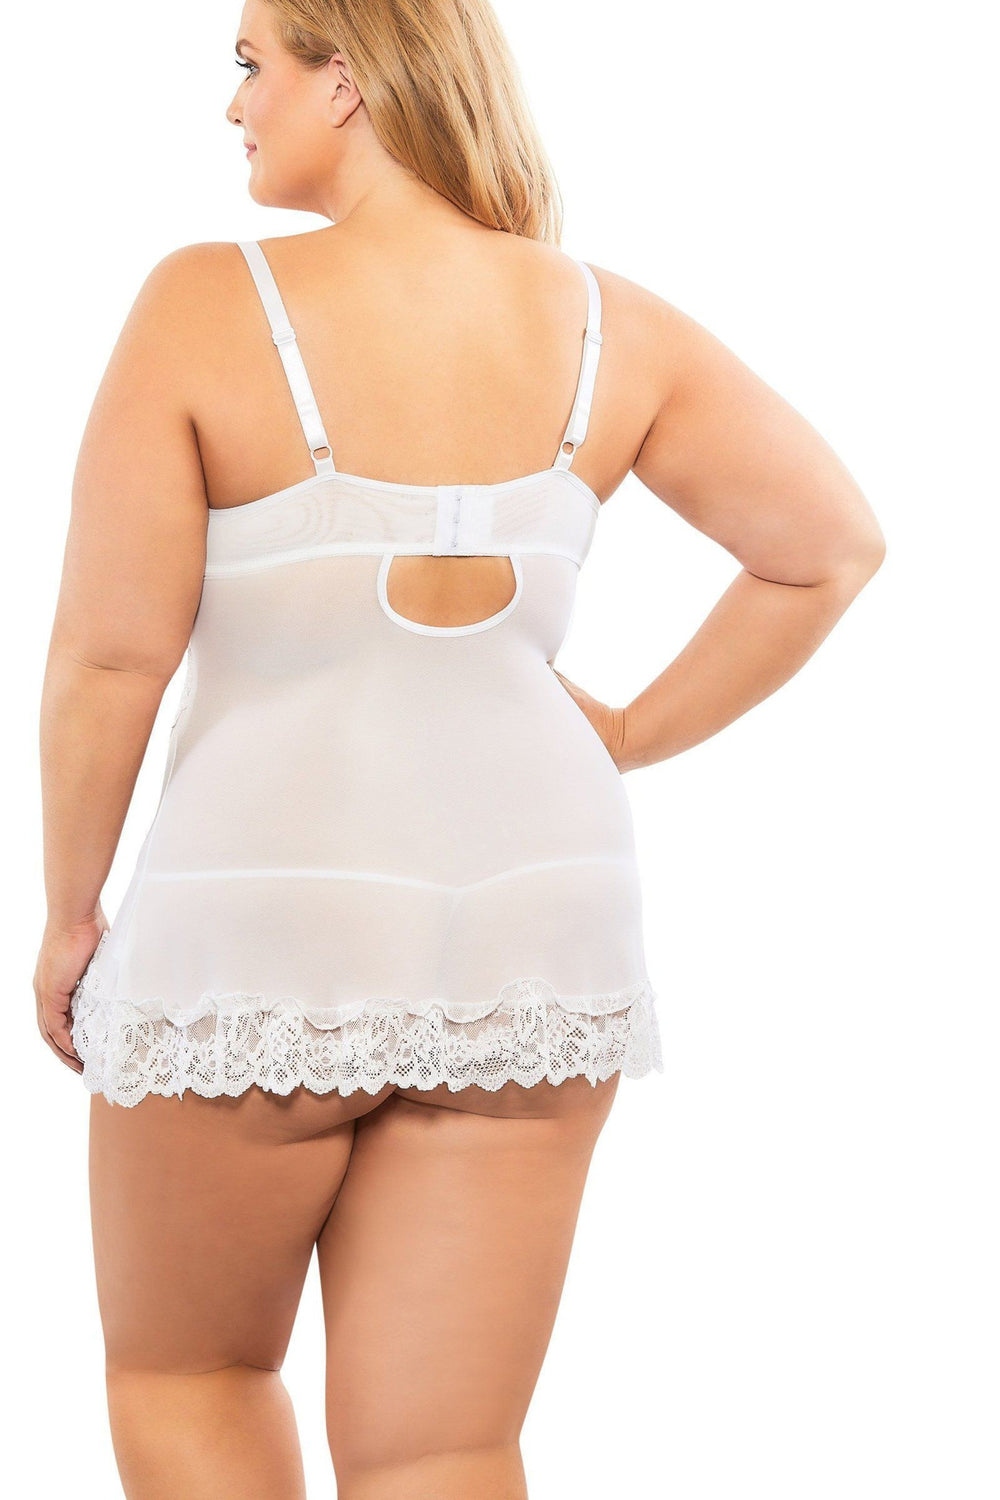 Plus Size Soft Cup Lacey Babydoll With Bows And G-String-Oh La La Cheri-SEXYSHOES.COM